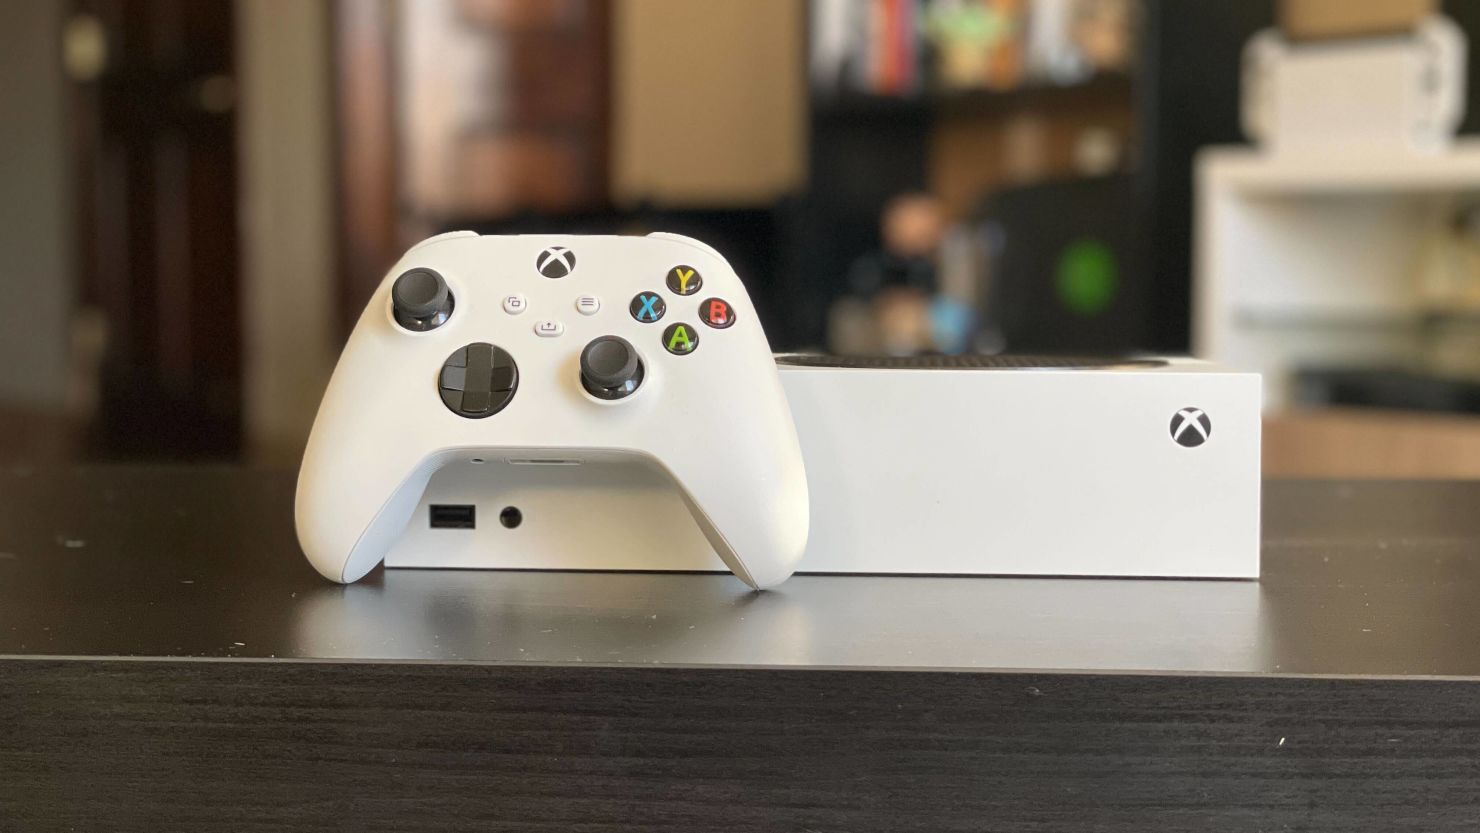 Xbox One S review: A slimmer gaming console but not a required upgrade